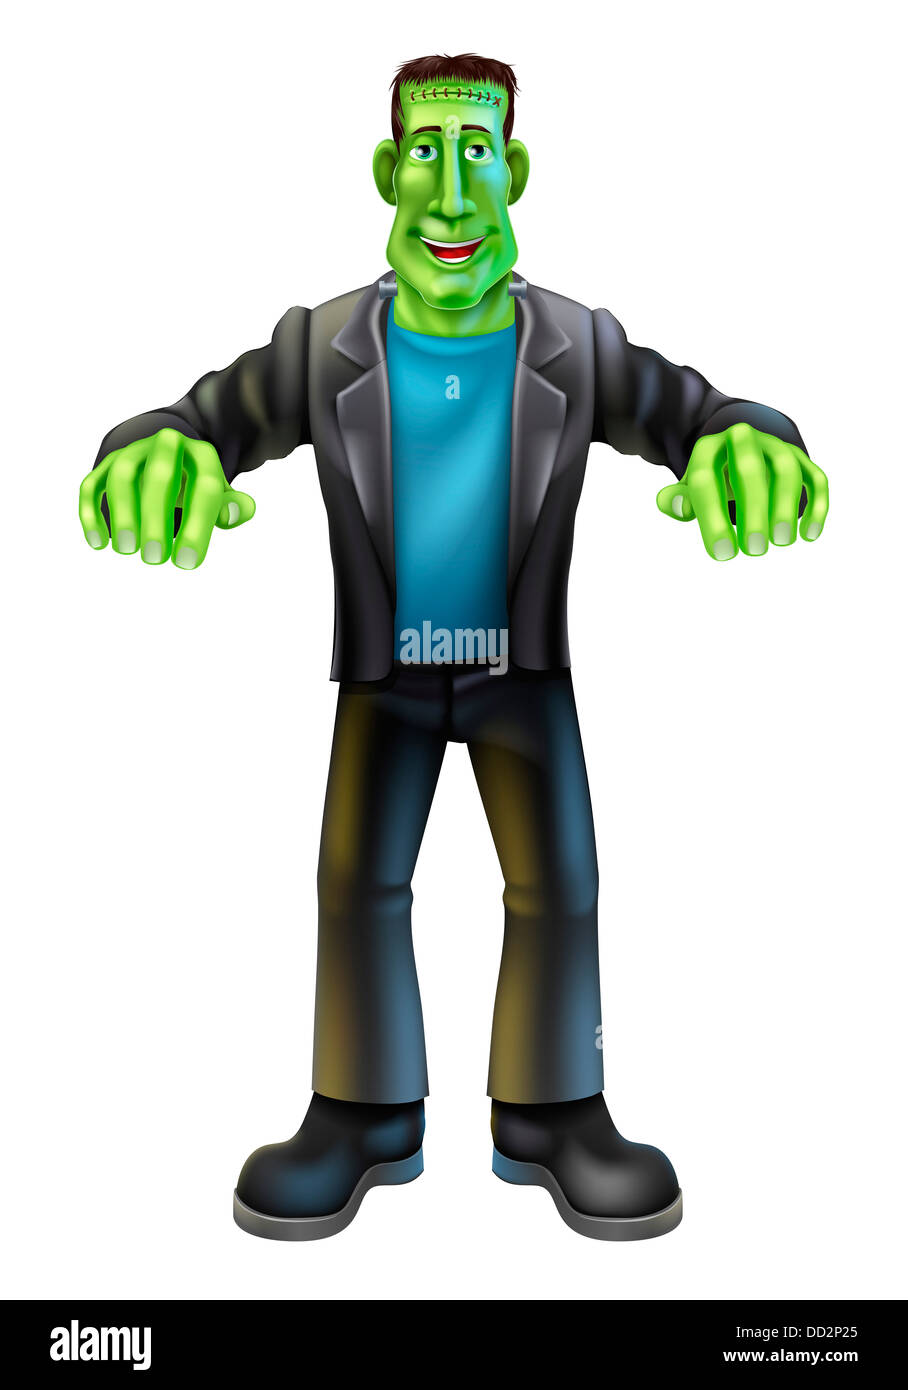 A Halloween cartoon Frankenstein monster character standing with his arms out in classic horror movie pose Stock Photo